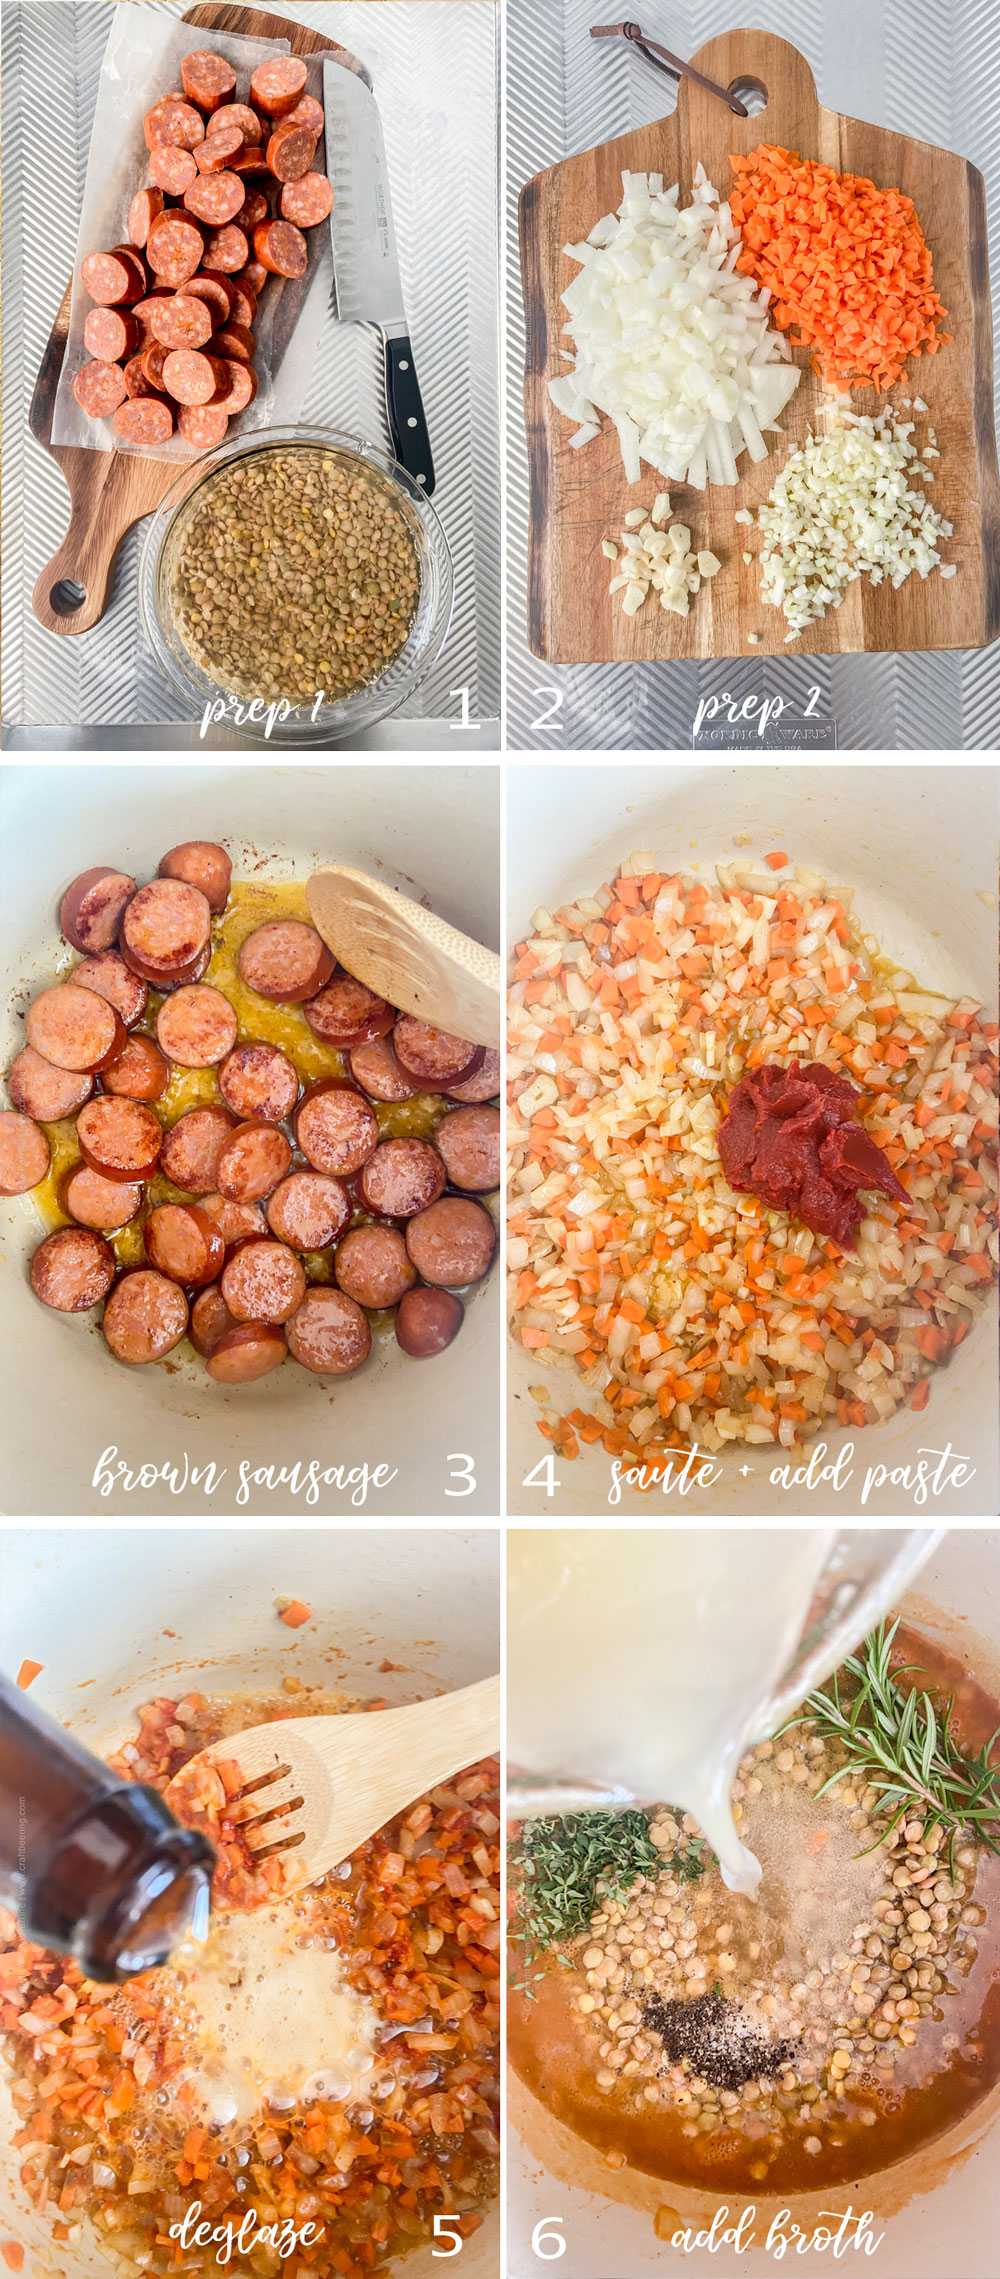 Step by step process of making lentil stew with Andouille sausage